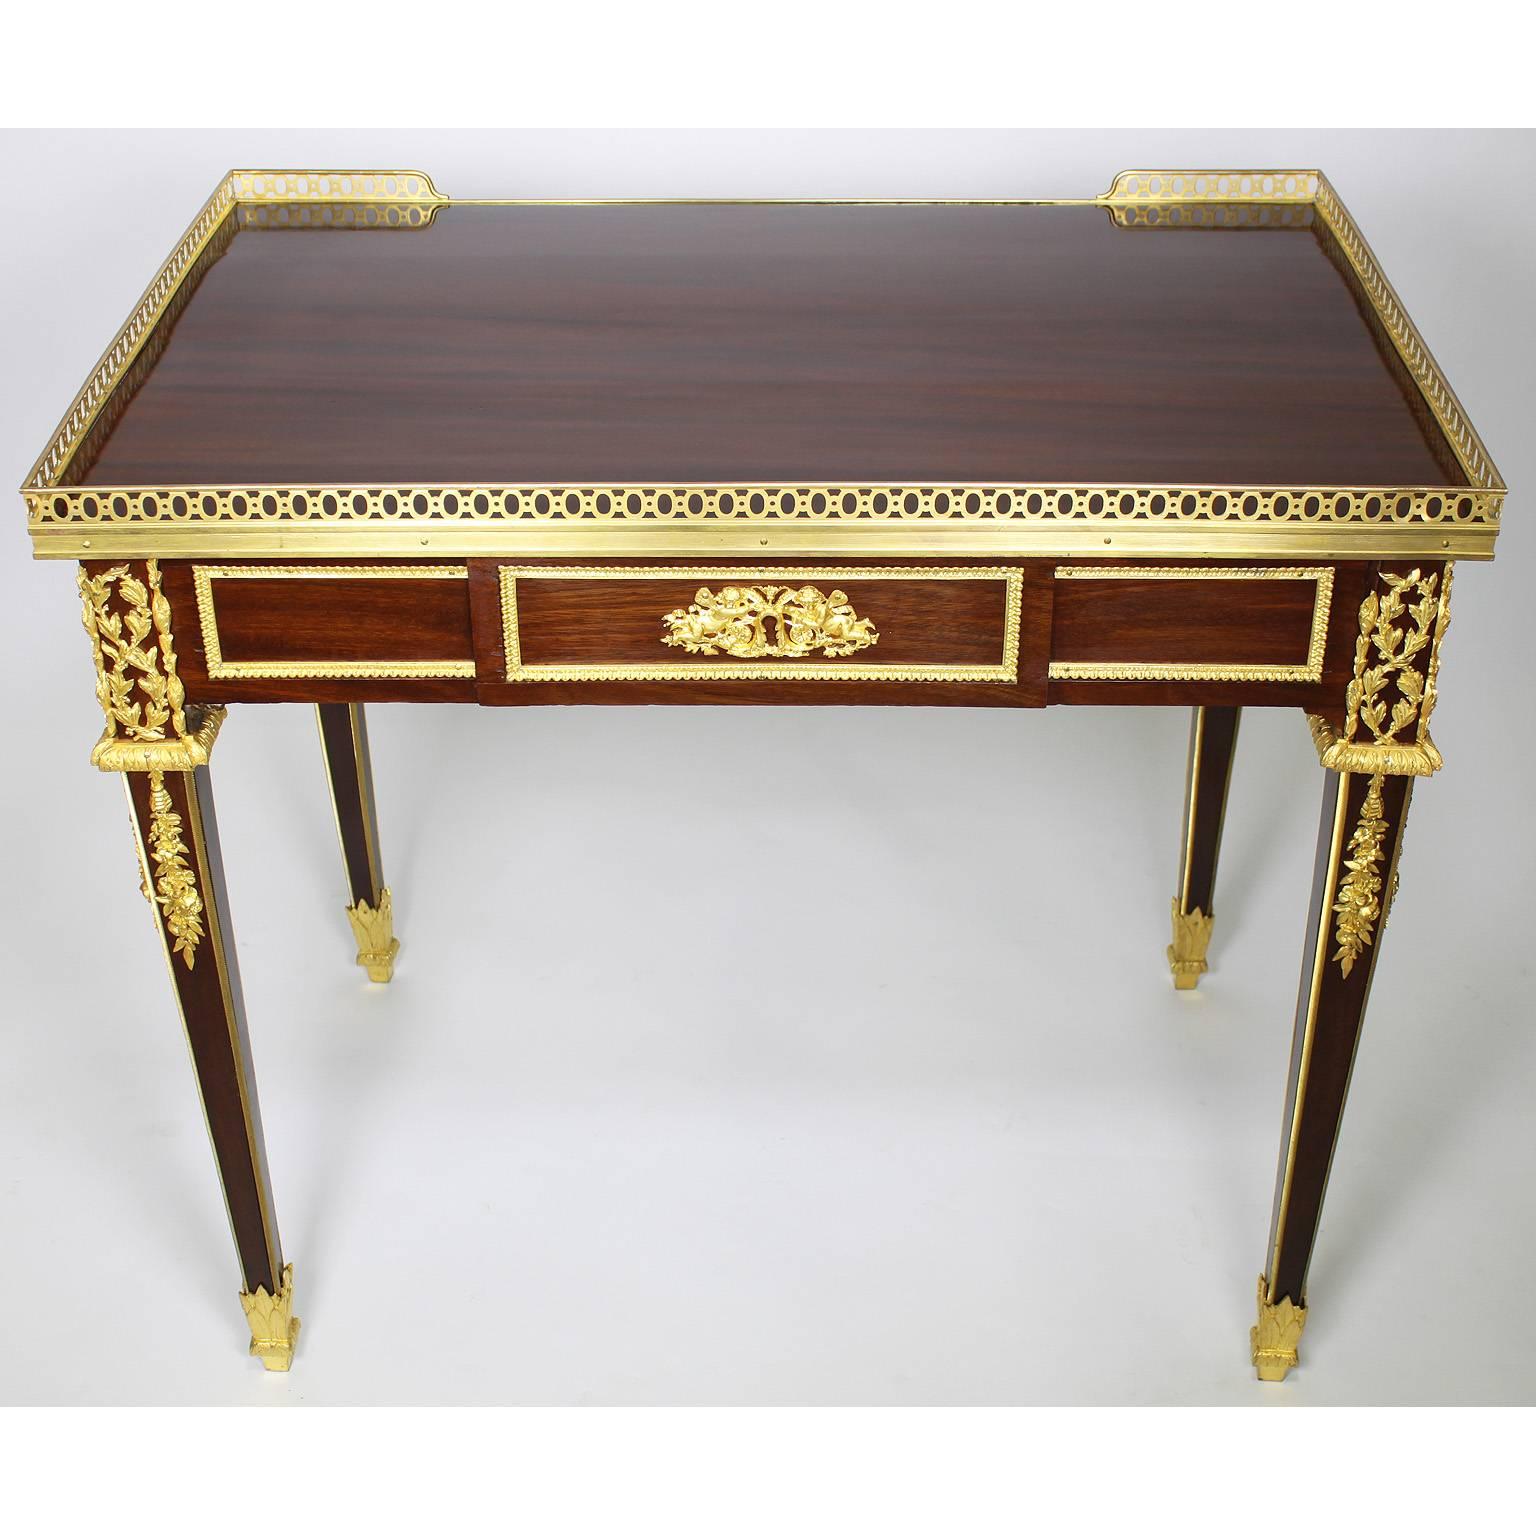 French 19th-20th Century Louis XVI Style Mahogany and Gilt-Bronze Mounted Table 1